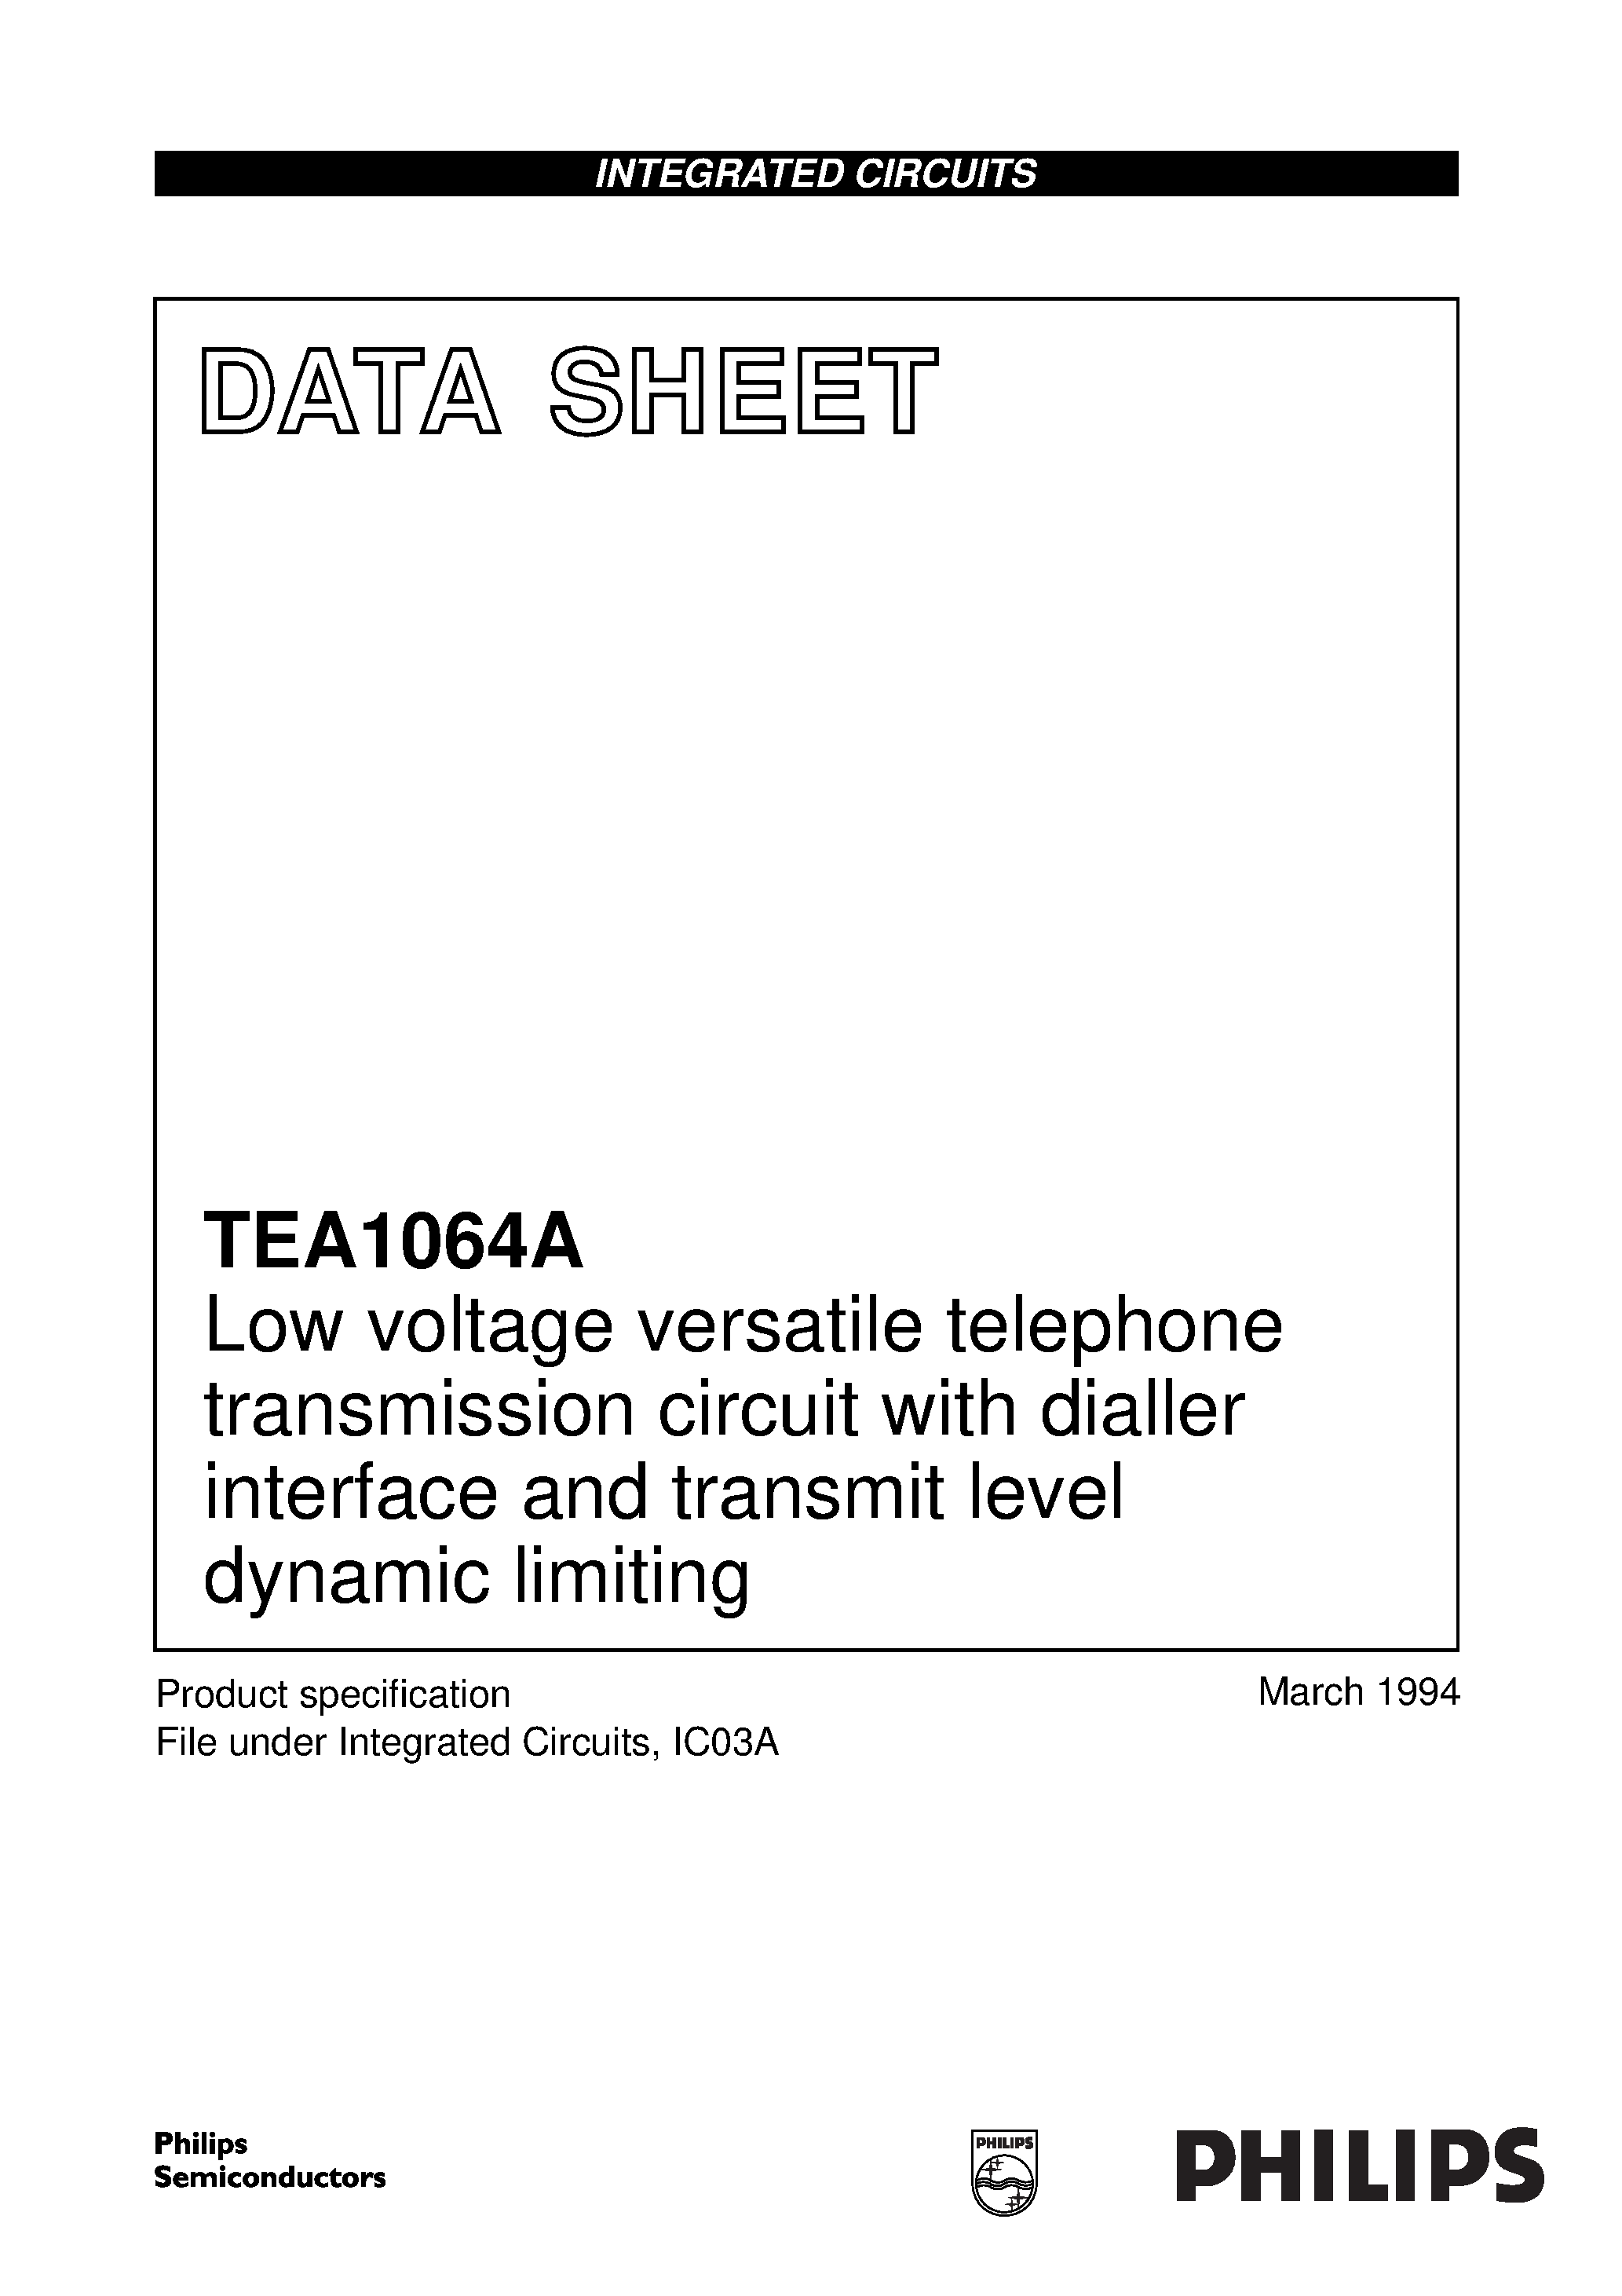 Datasheet TEA1064A - Low voltage versatile telephone transmission circuit with dialler interface and transmit level dynamic limiting page 1